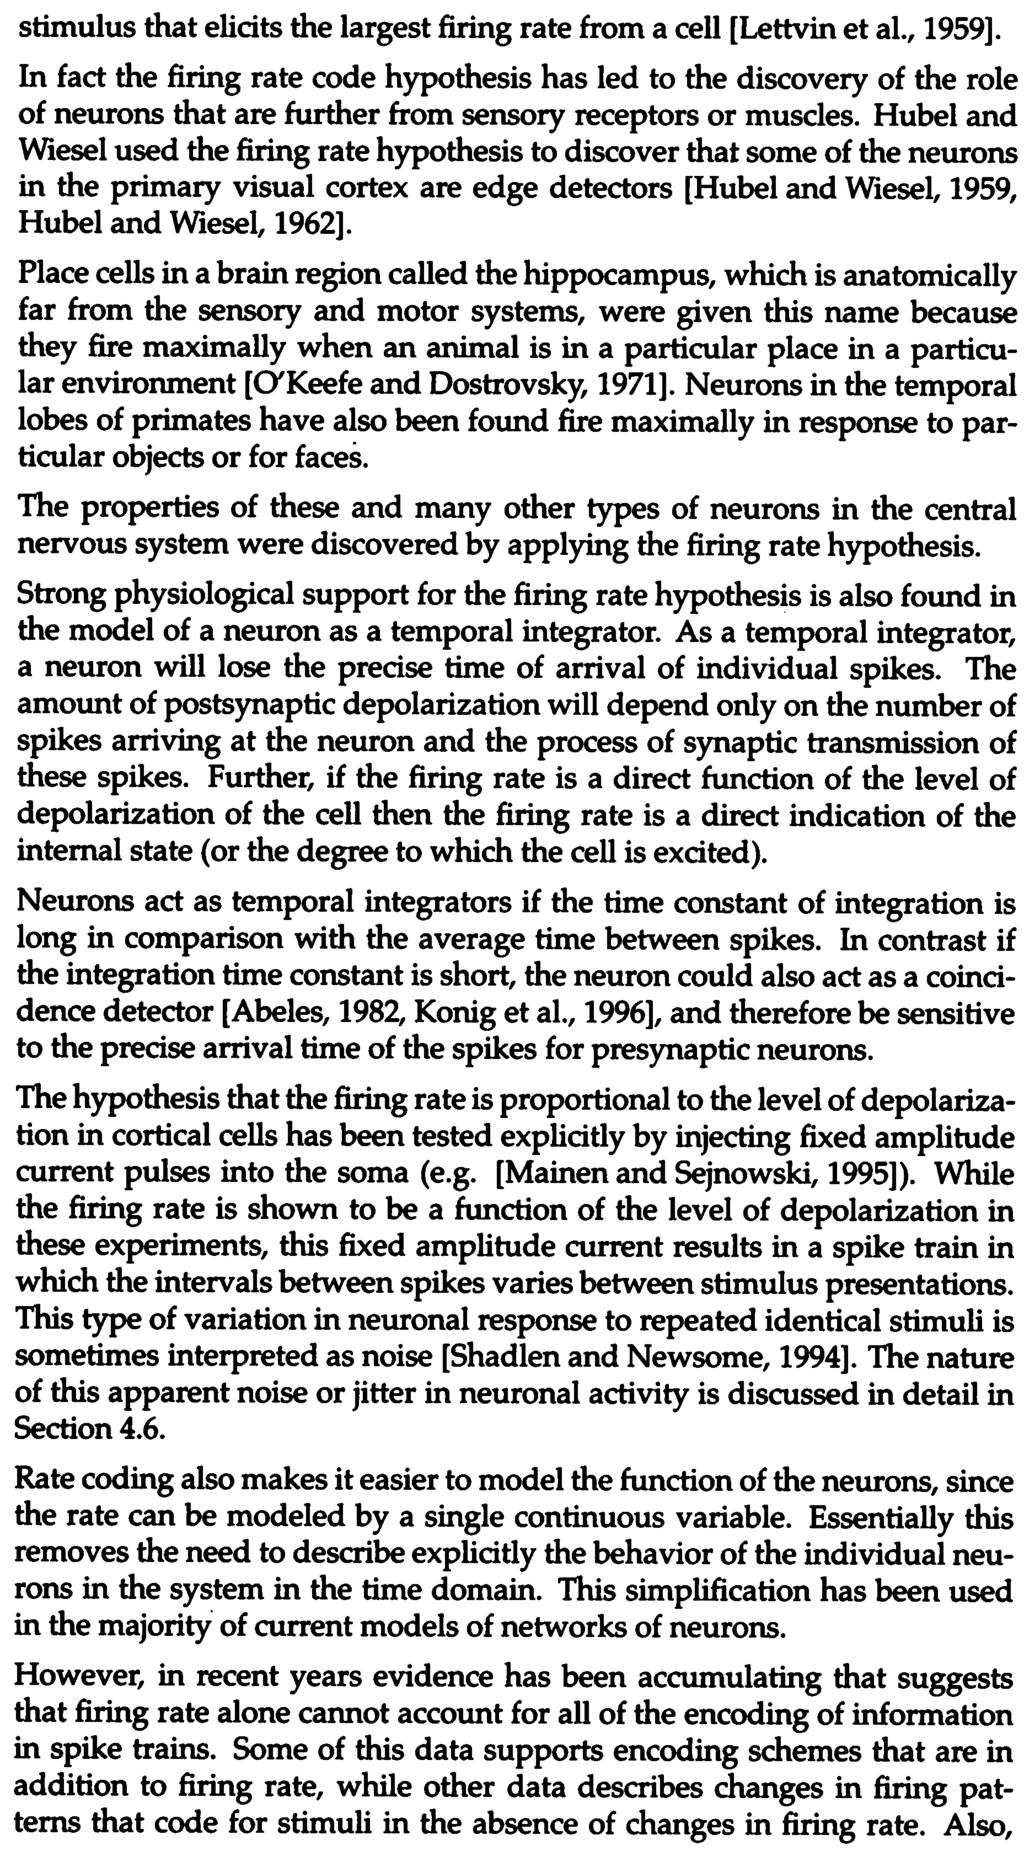 41 Introduction 113 stimulus that elicits the largest rate from a cell [Lettvin et al 1959] In fact the rate code hypothesis has led to the discovery of the role of neurons that are further from